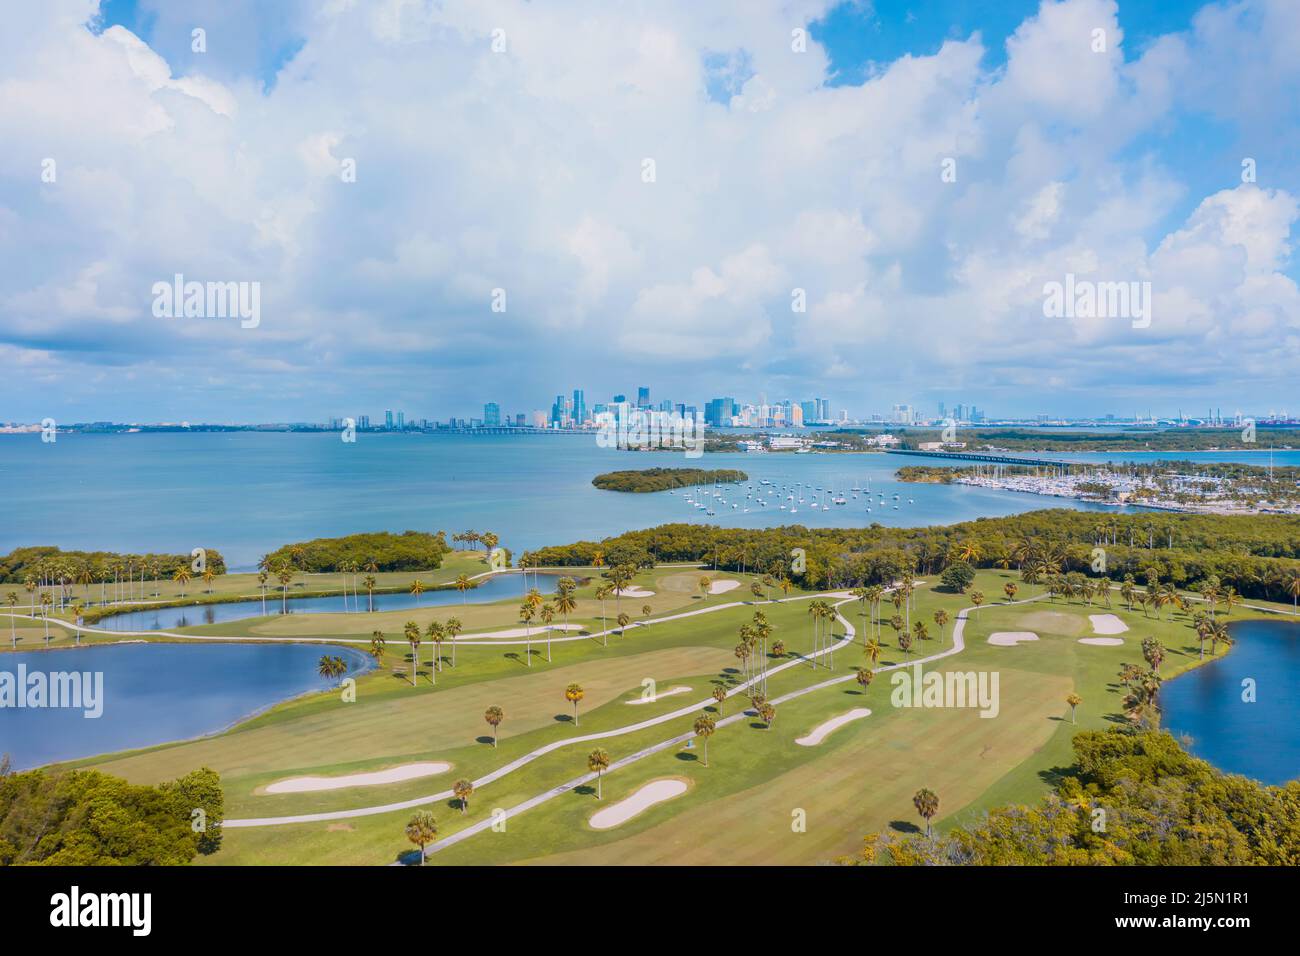 Bayfront golf course in Key Biscayne Floria Stock Photo